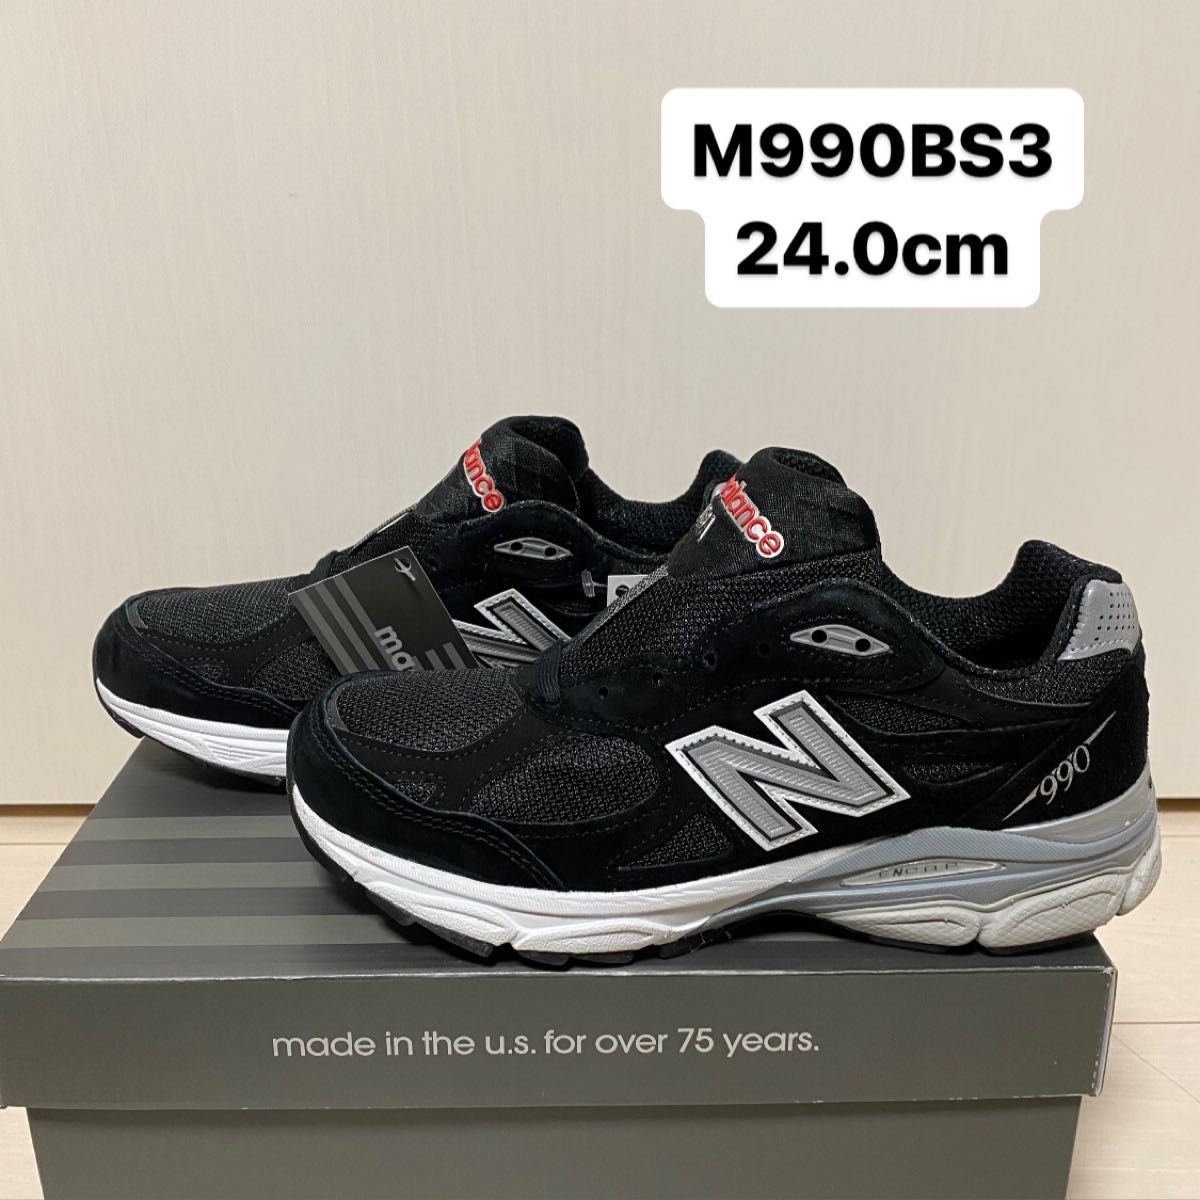 made in USA NEW BALANCE 990v3 M990BS3 24.0cm